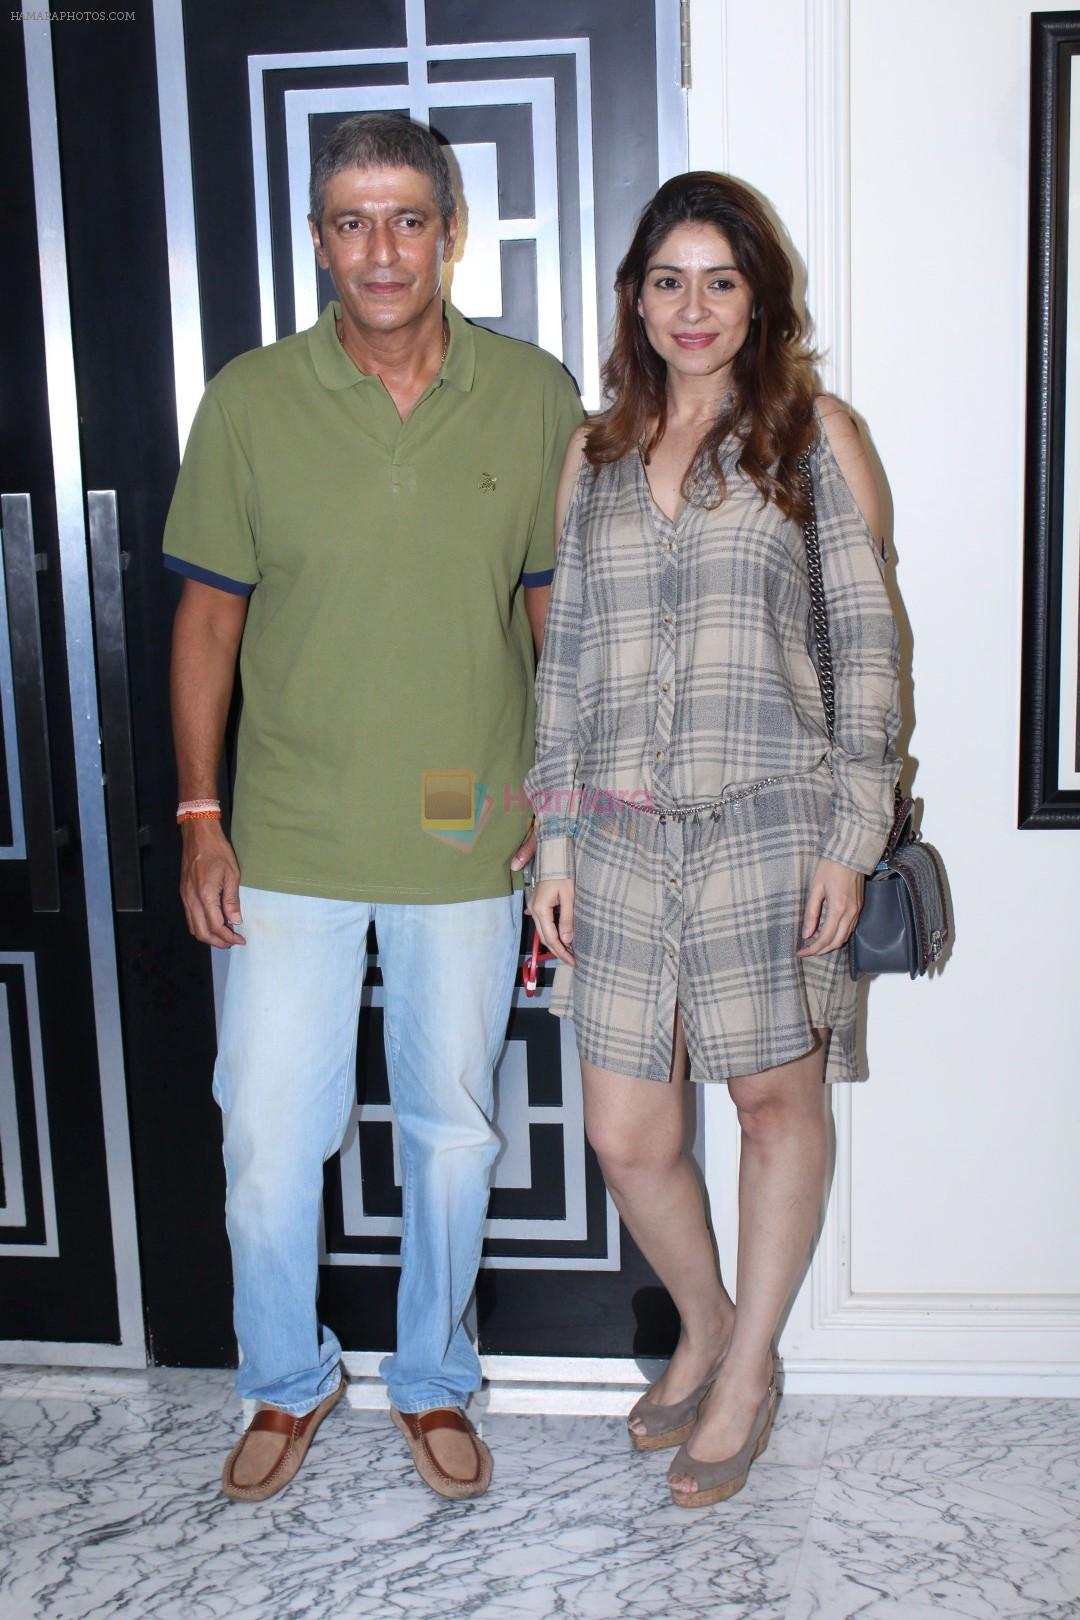 Chunky Pandey at the Special Screening Of Film Daddy on 6th Sept 2017